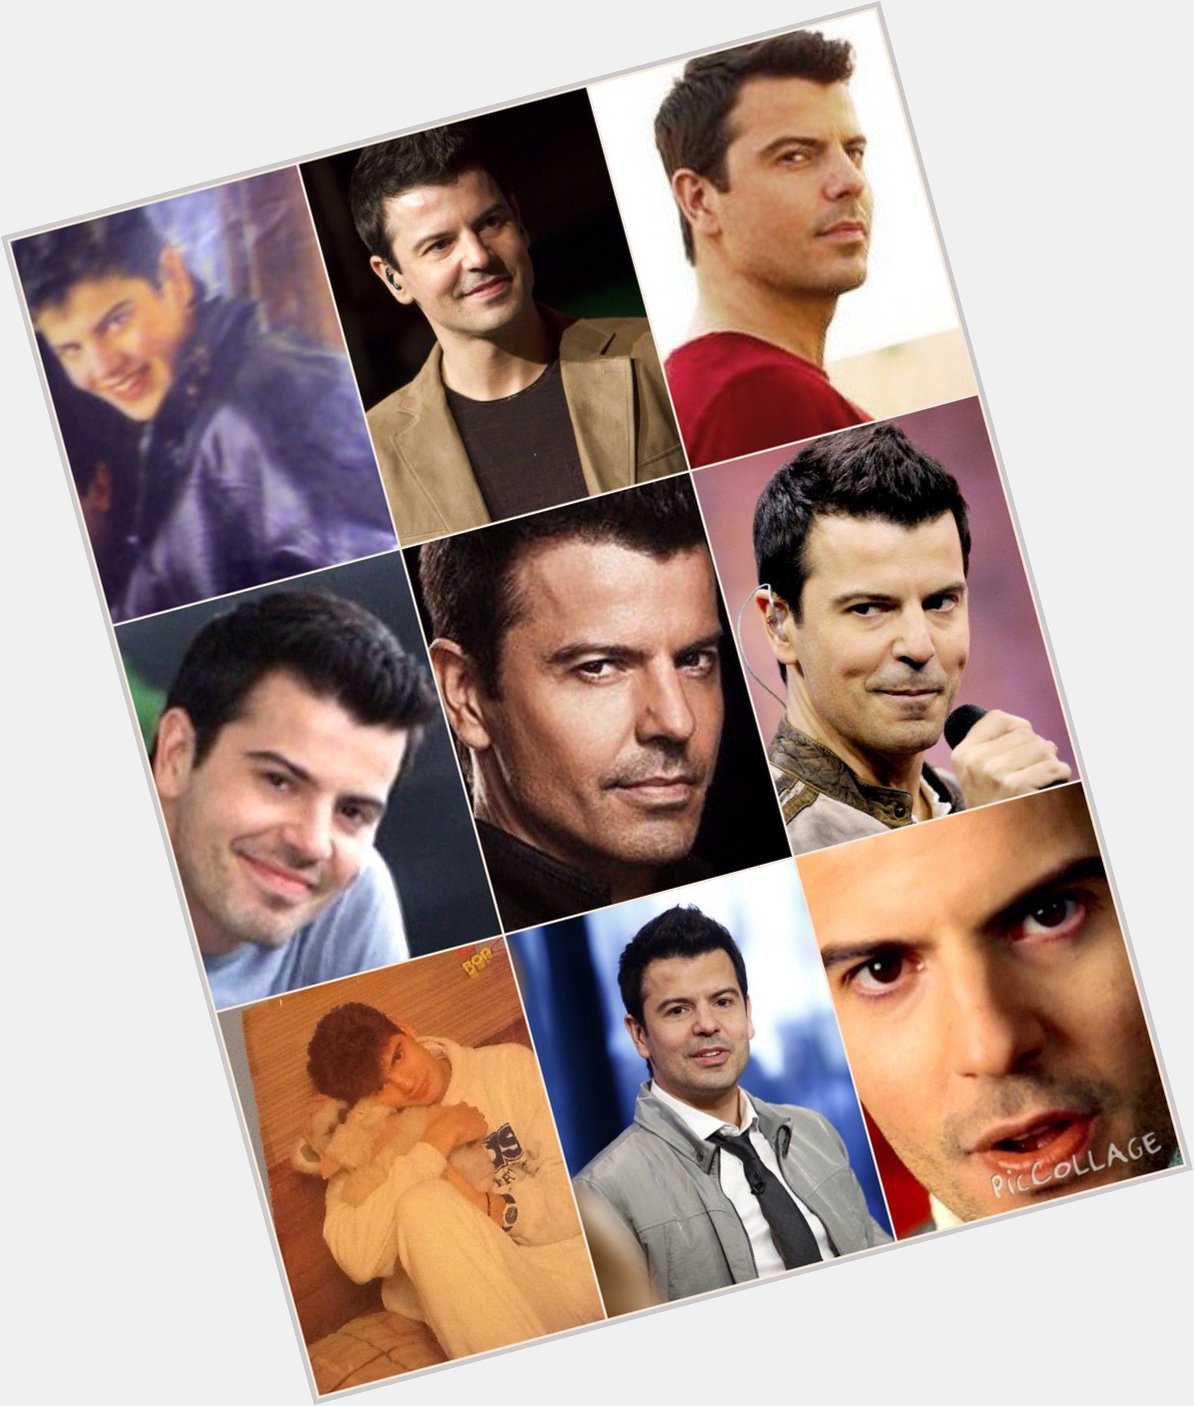  Happy Birthday to this one right here Jordan Knight 